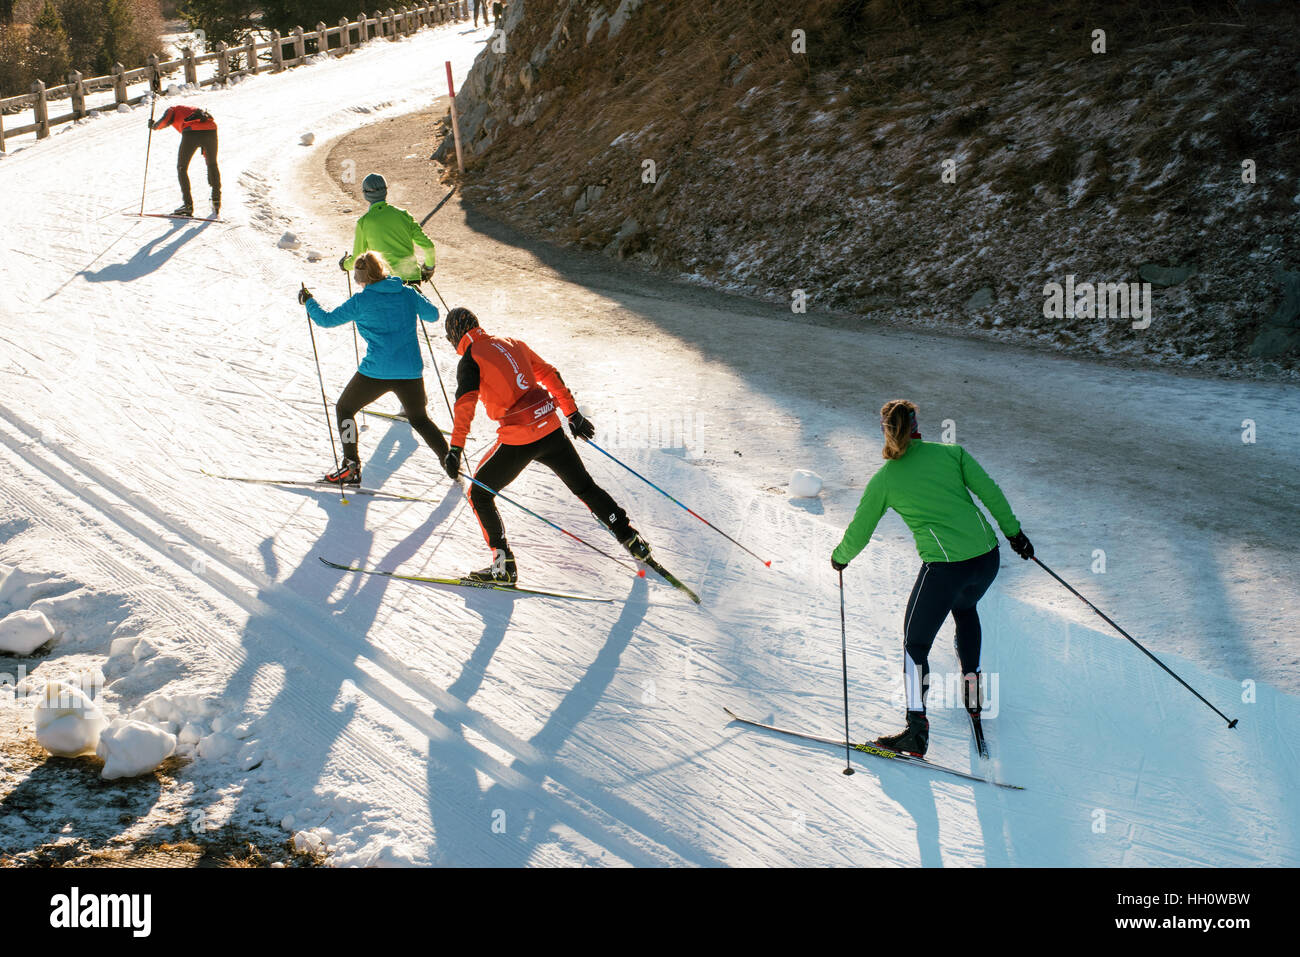 Team of young people cross country skiing training on a winding mountain road in colorful ski clothes Stock Photo